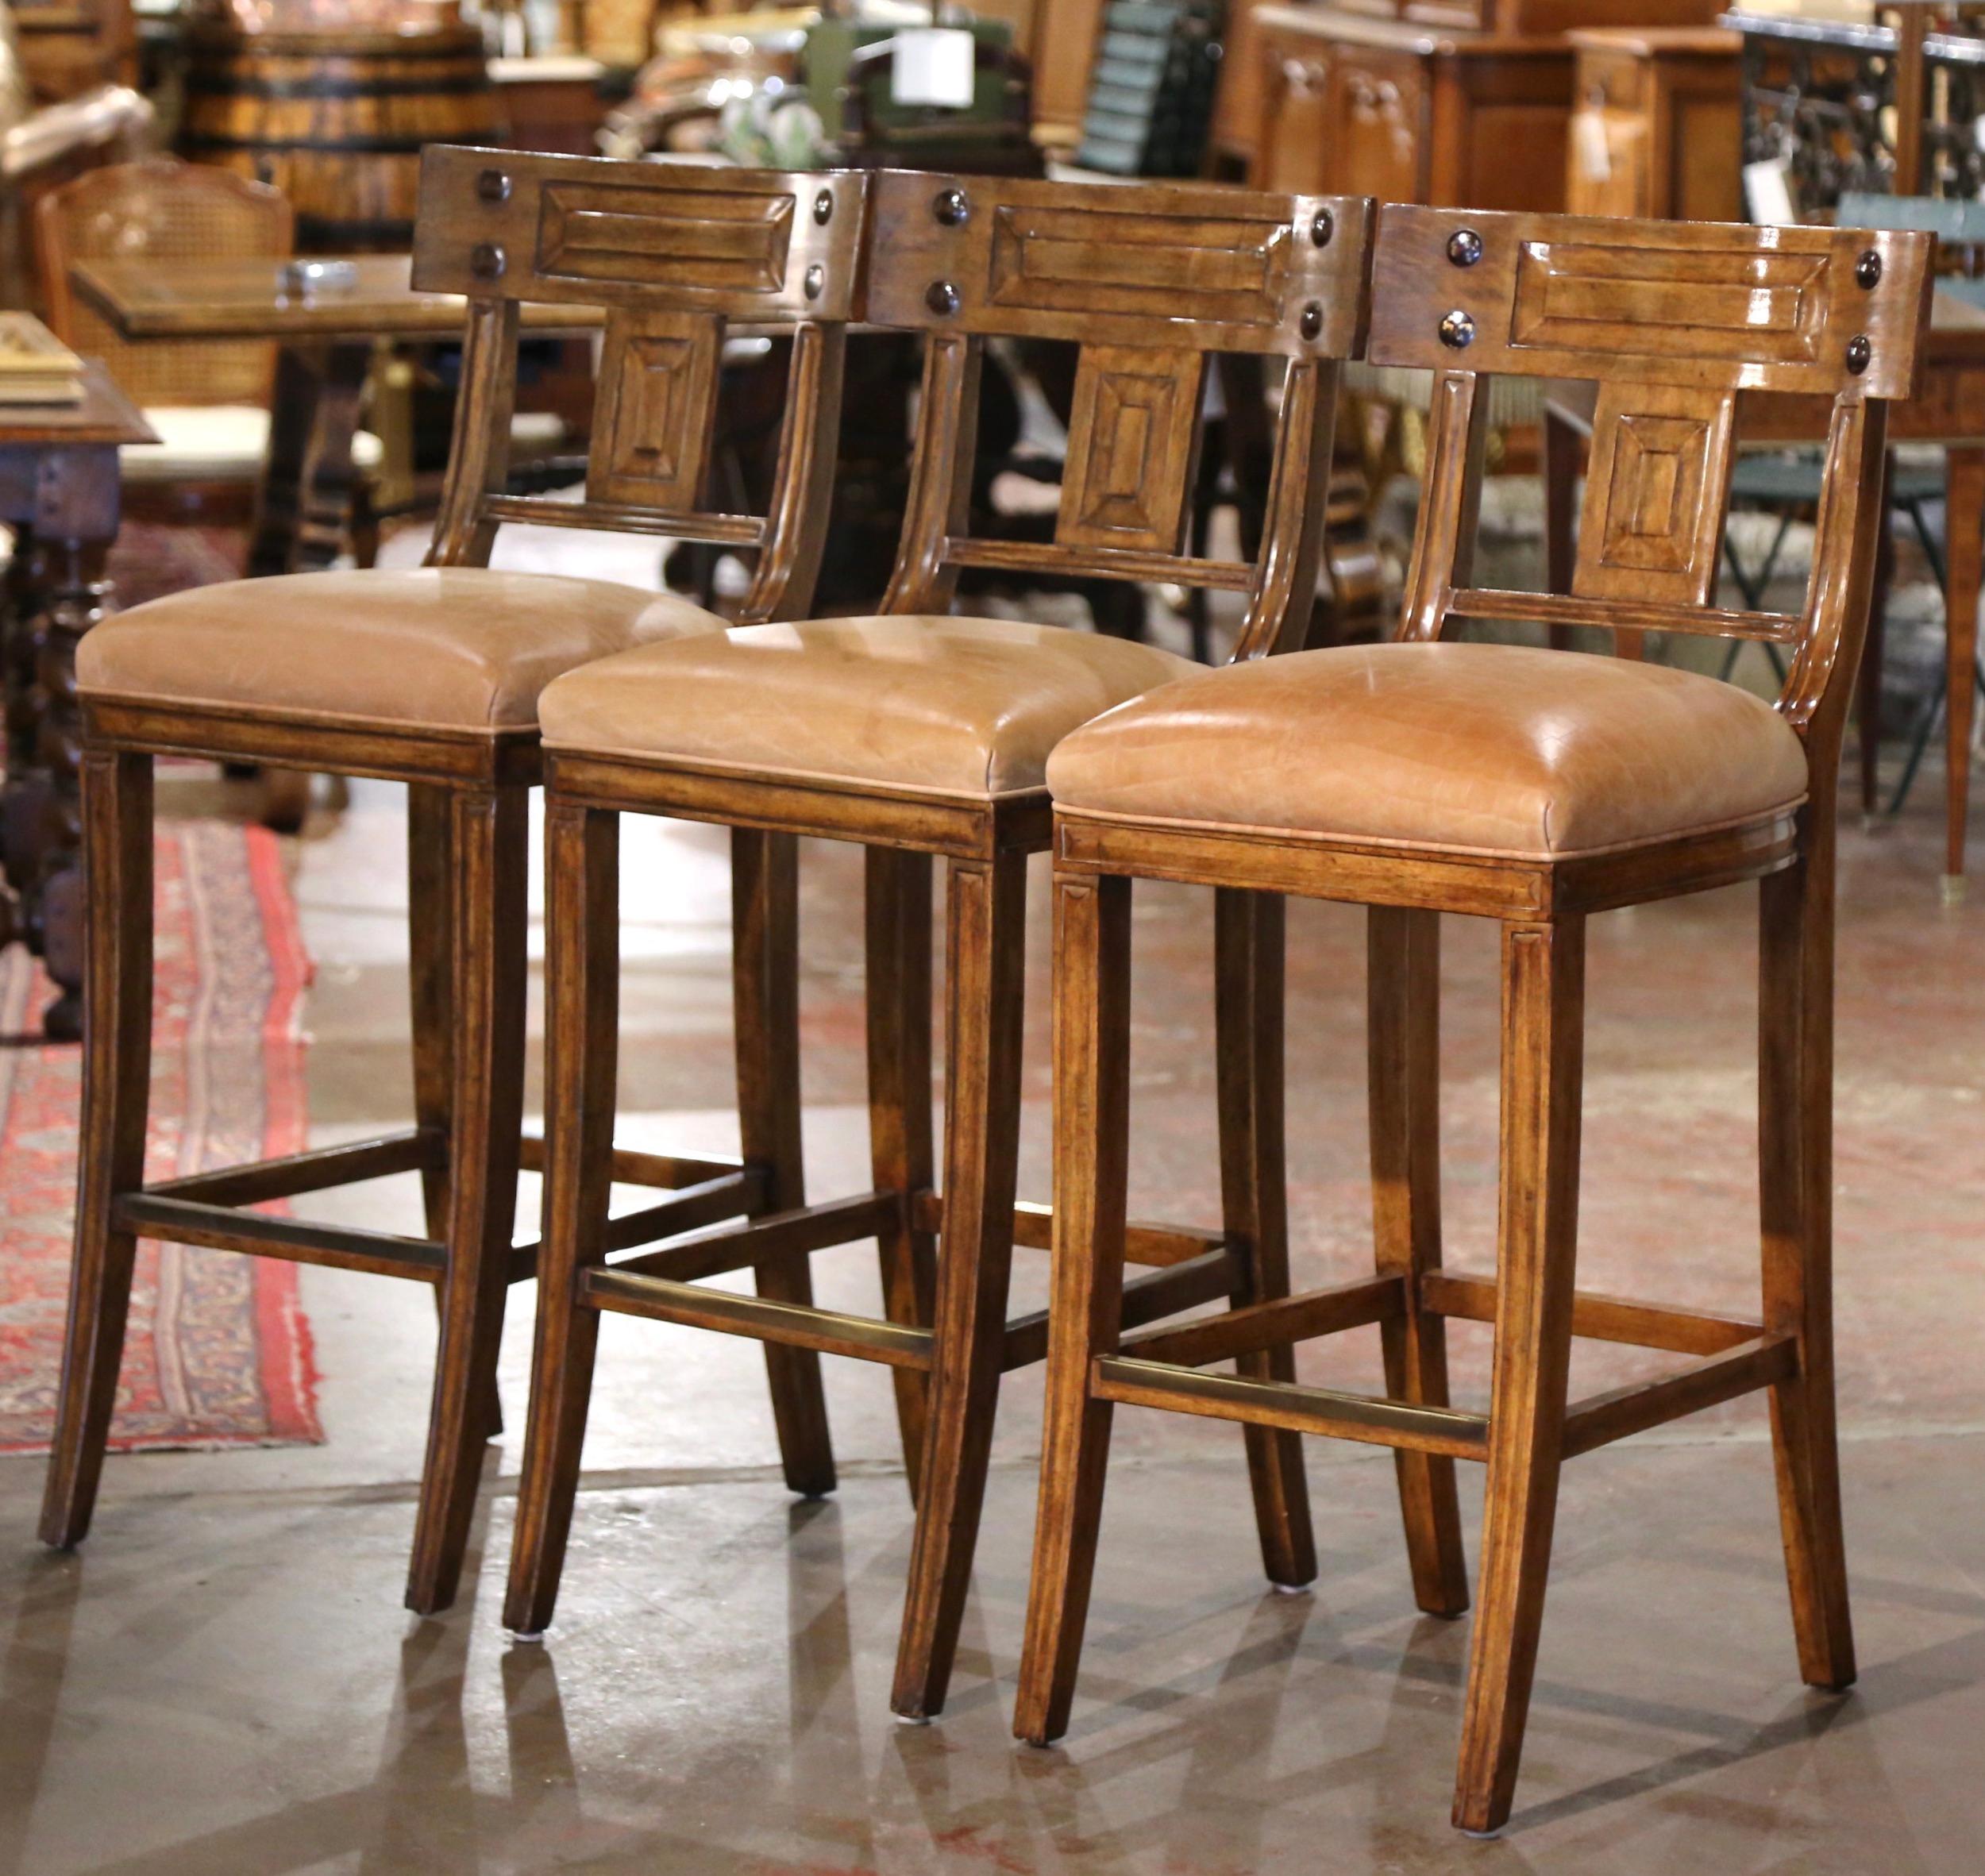 Place these large three stools with back around a kitchen island for extra seating. Crafted by Michael Taylor Designs circa 2000, the Classic bar stools are 30.5” in seat height, the perfect height for a tall bar! Each curved back decorated with